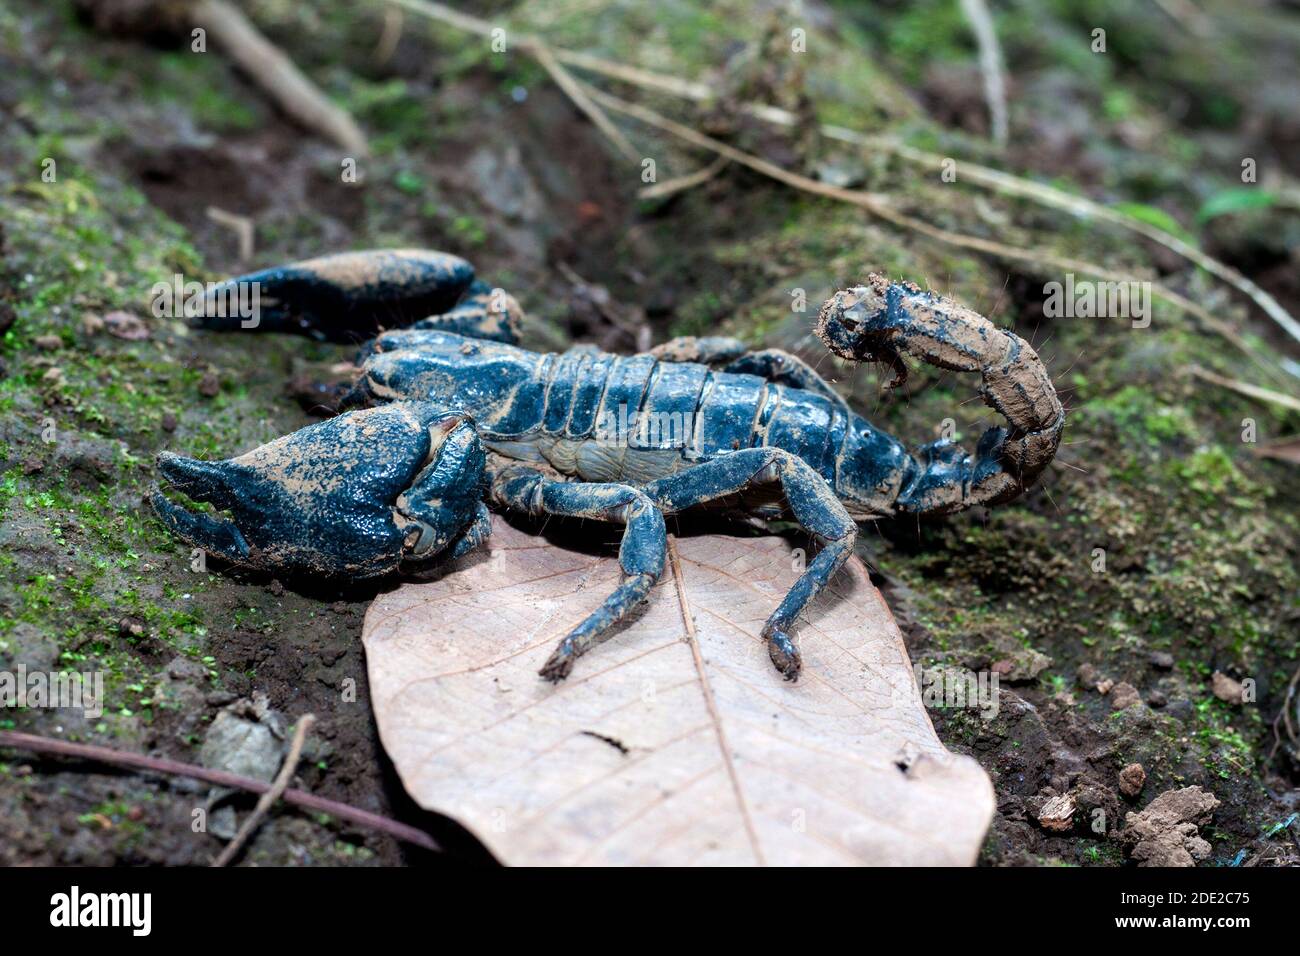 Poisonous scorpion, venomous gland on its tail, 2 large claws on both sides. Stock Photo